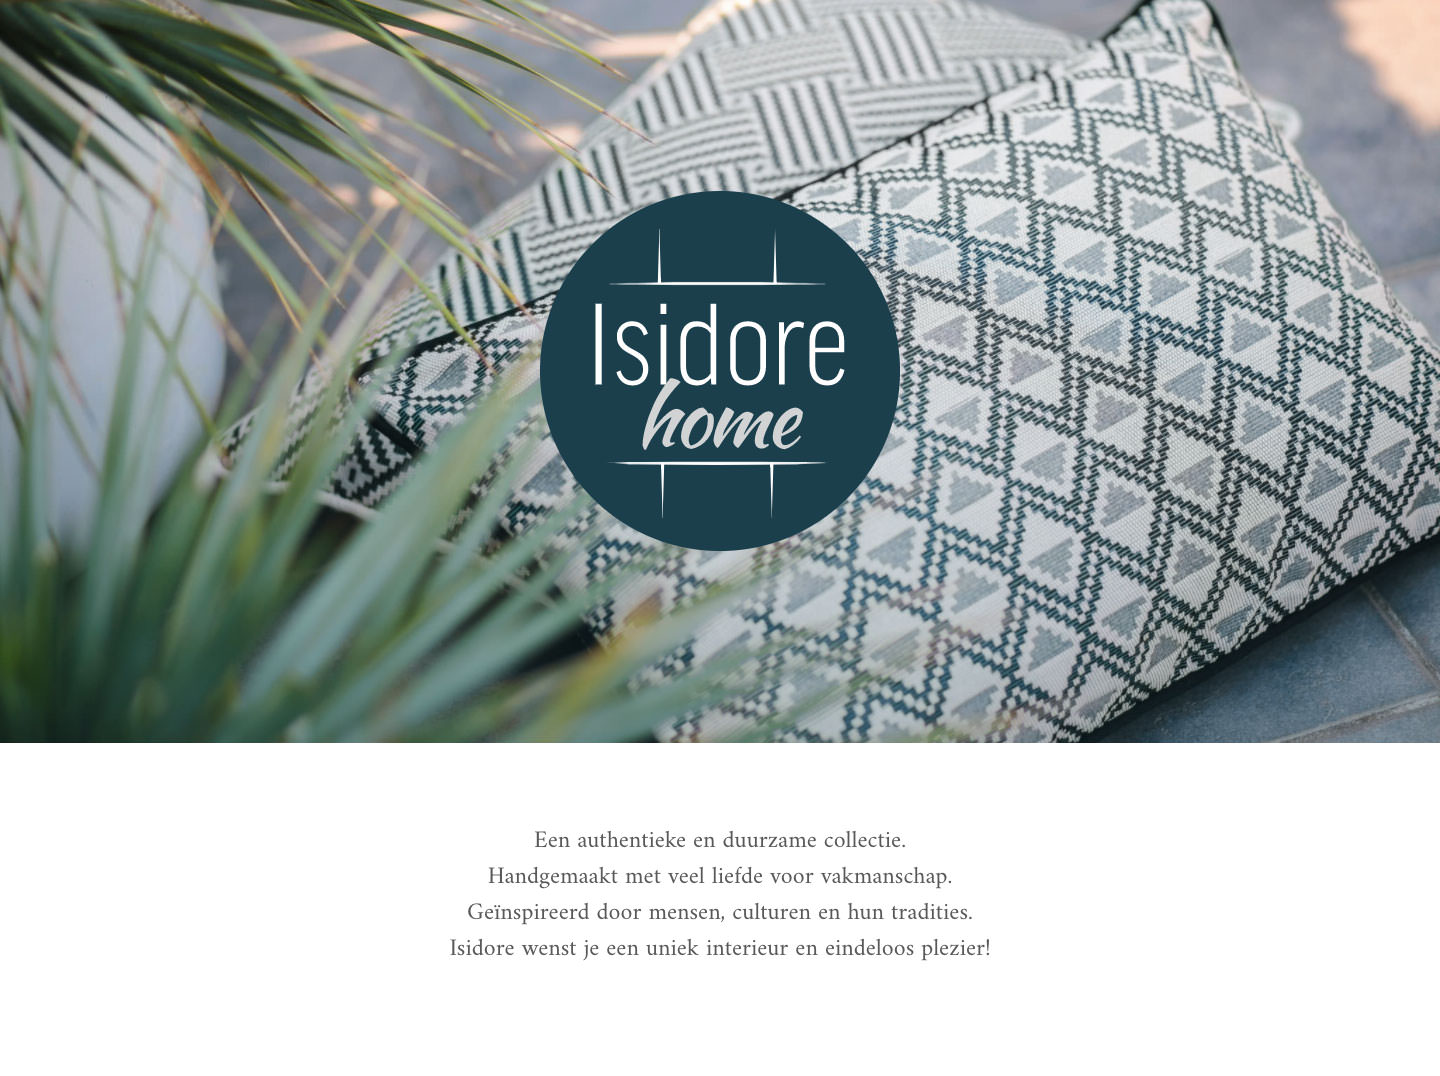 The intro page of Isidore.